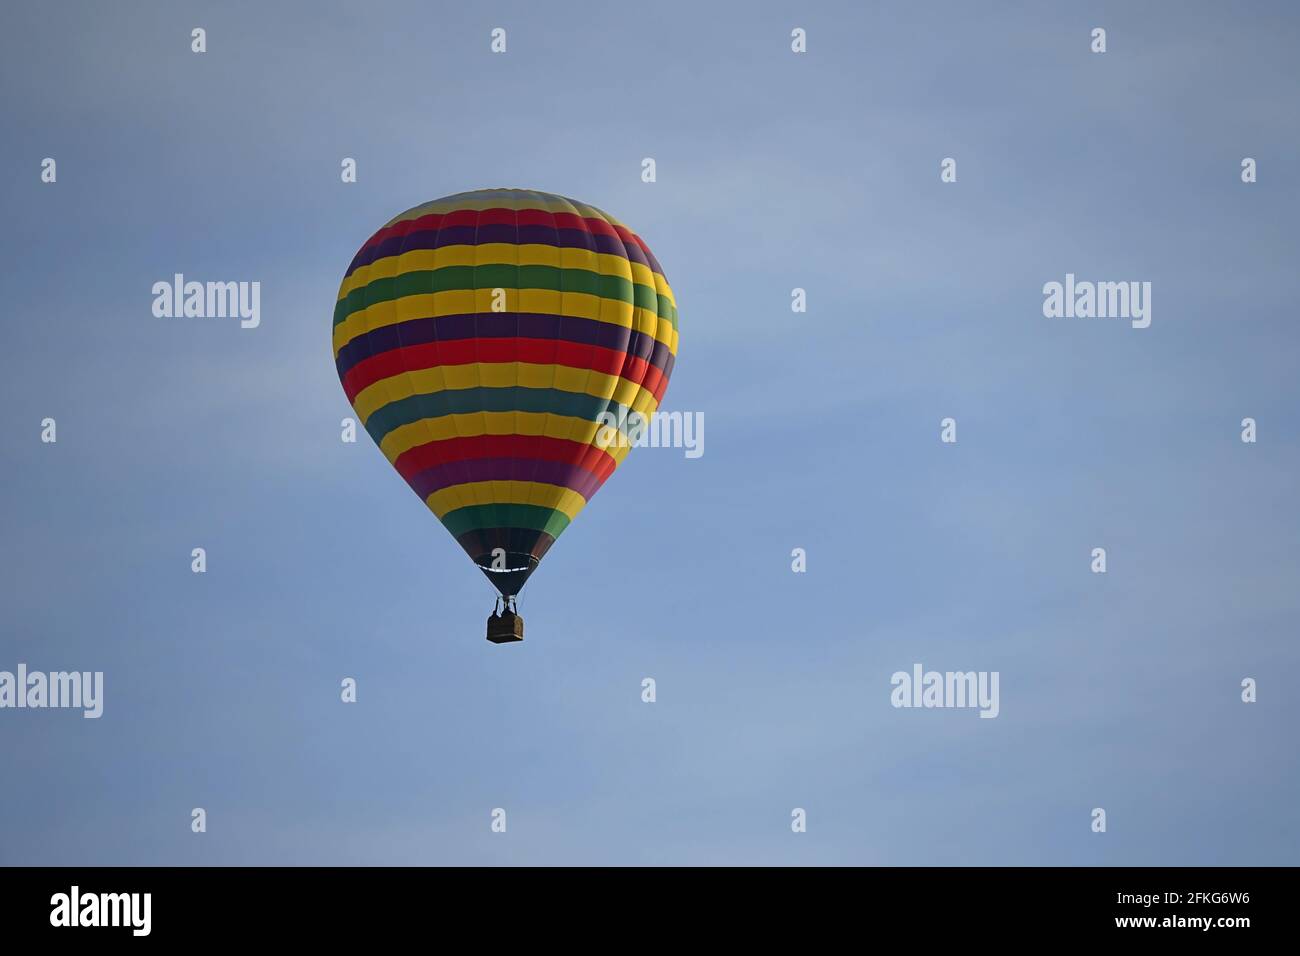 Hot Air Ballooning in a California Wine Country Sky Stock Photo - Alamy